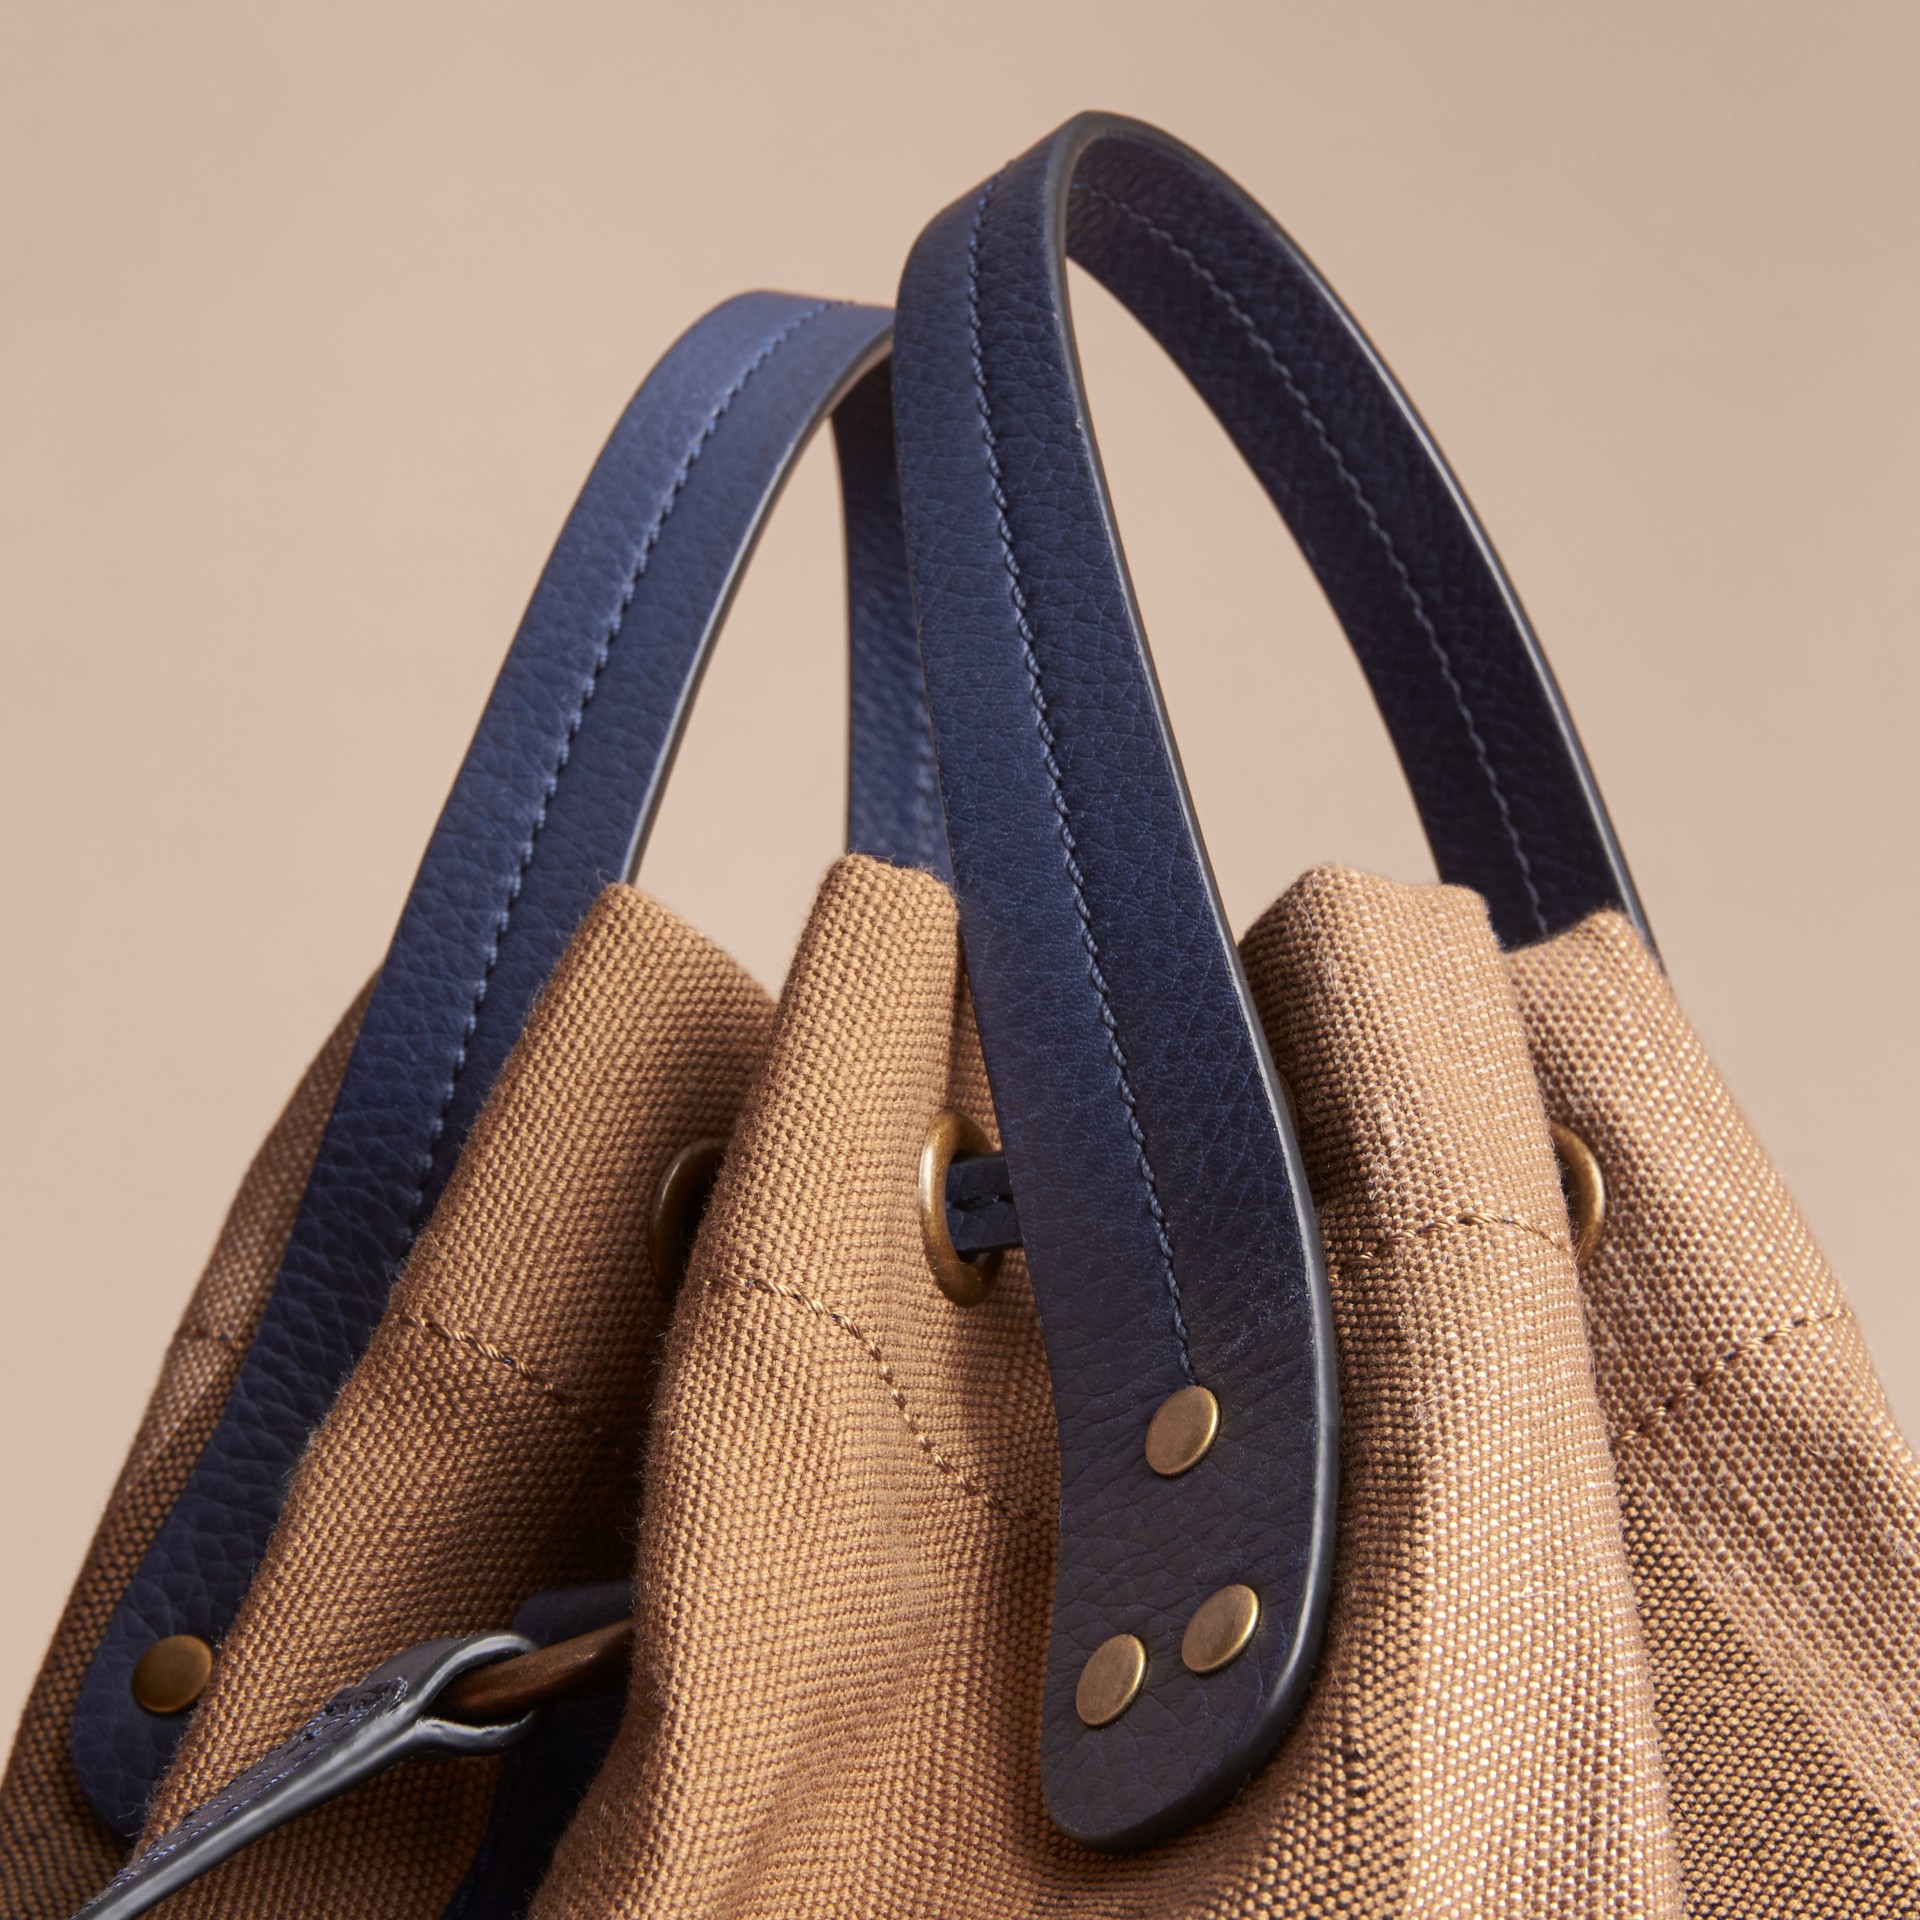 Small Canvas Check and Leather Bucket Bag in Brilliant Navy - Women | Burberry United States